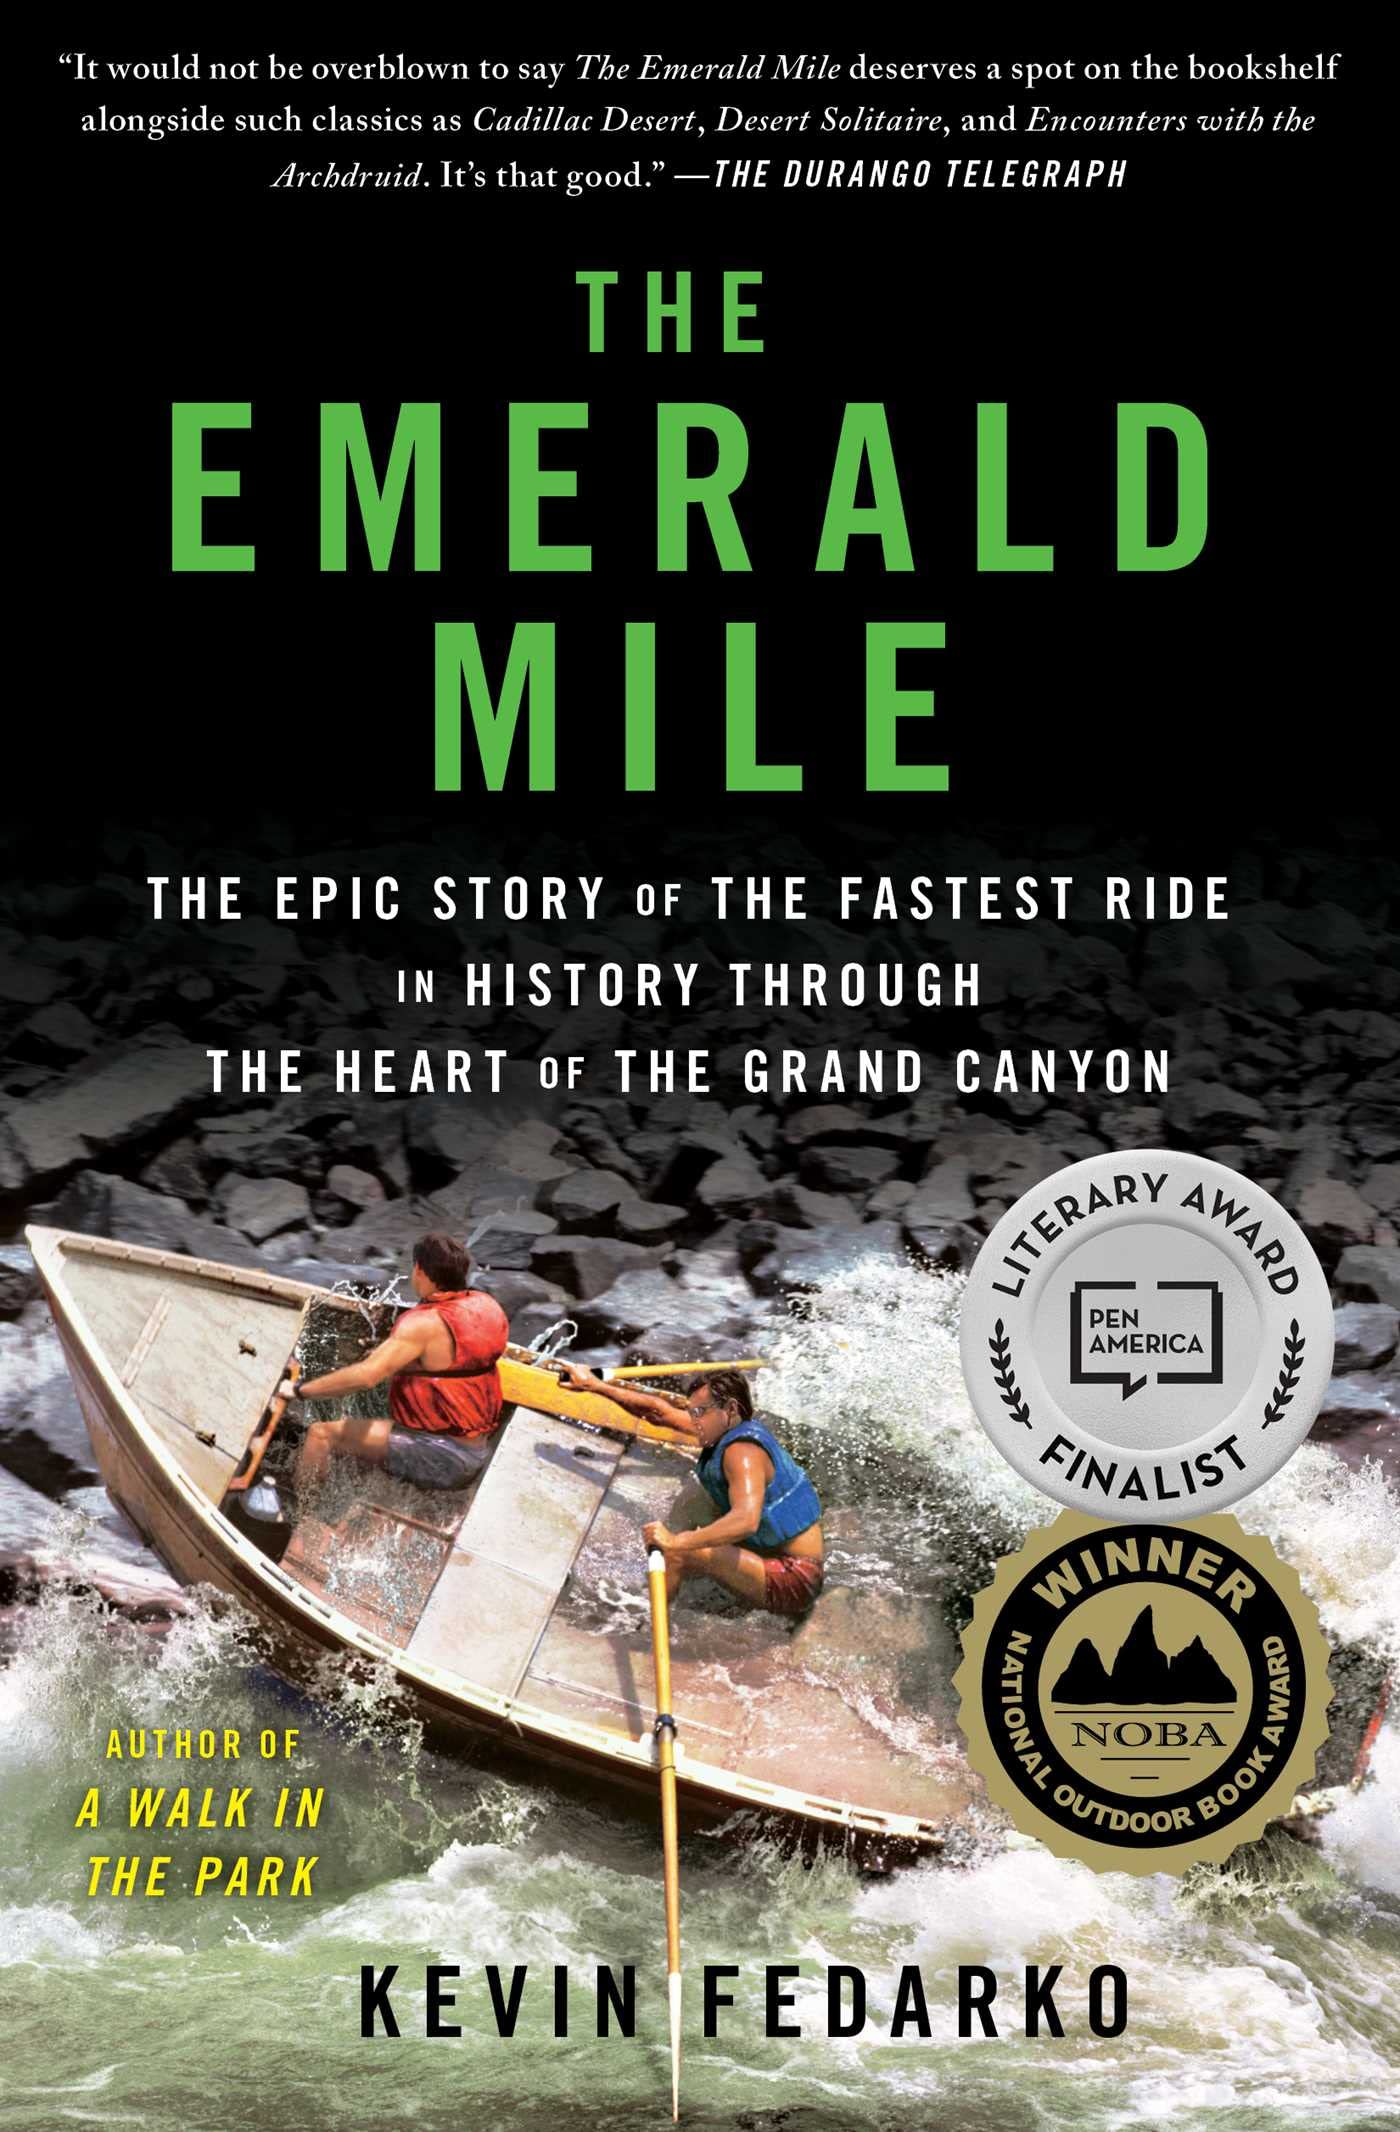 The Emerald Mile: The Epic Story of the Fastest Ride in History Through the Heart of the Grand Canyon by Fedarko, Kevin